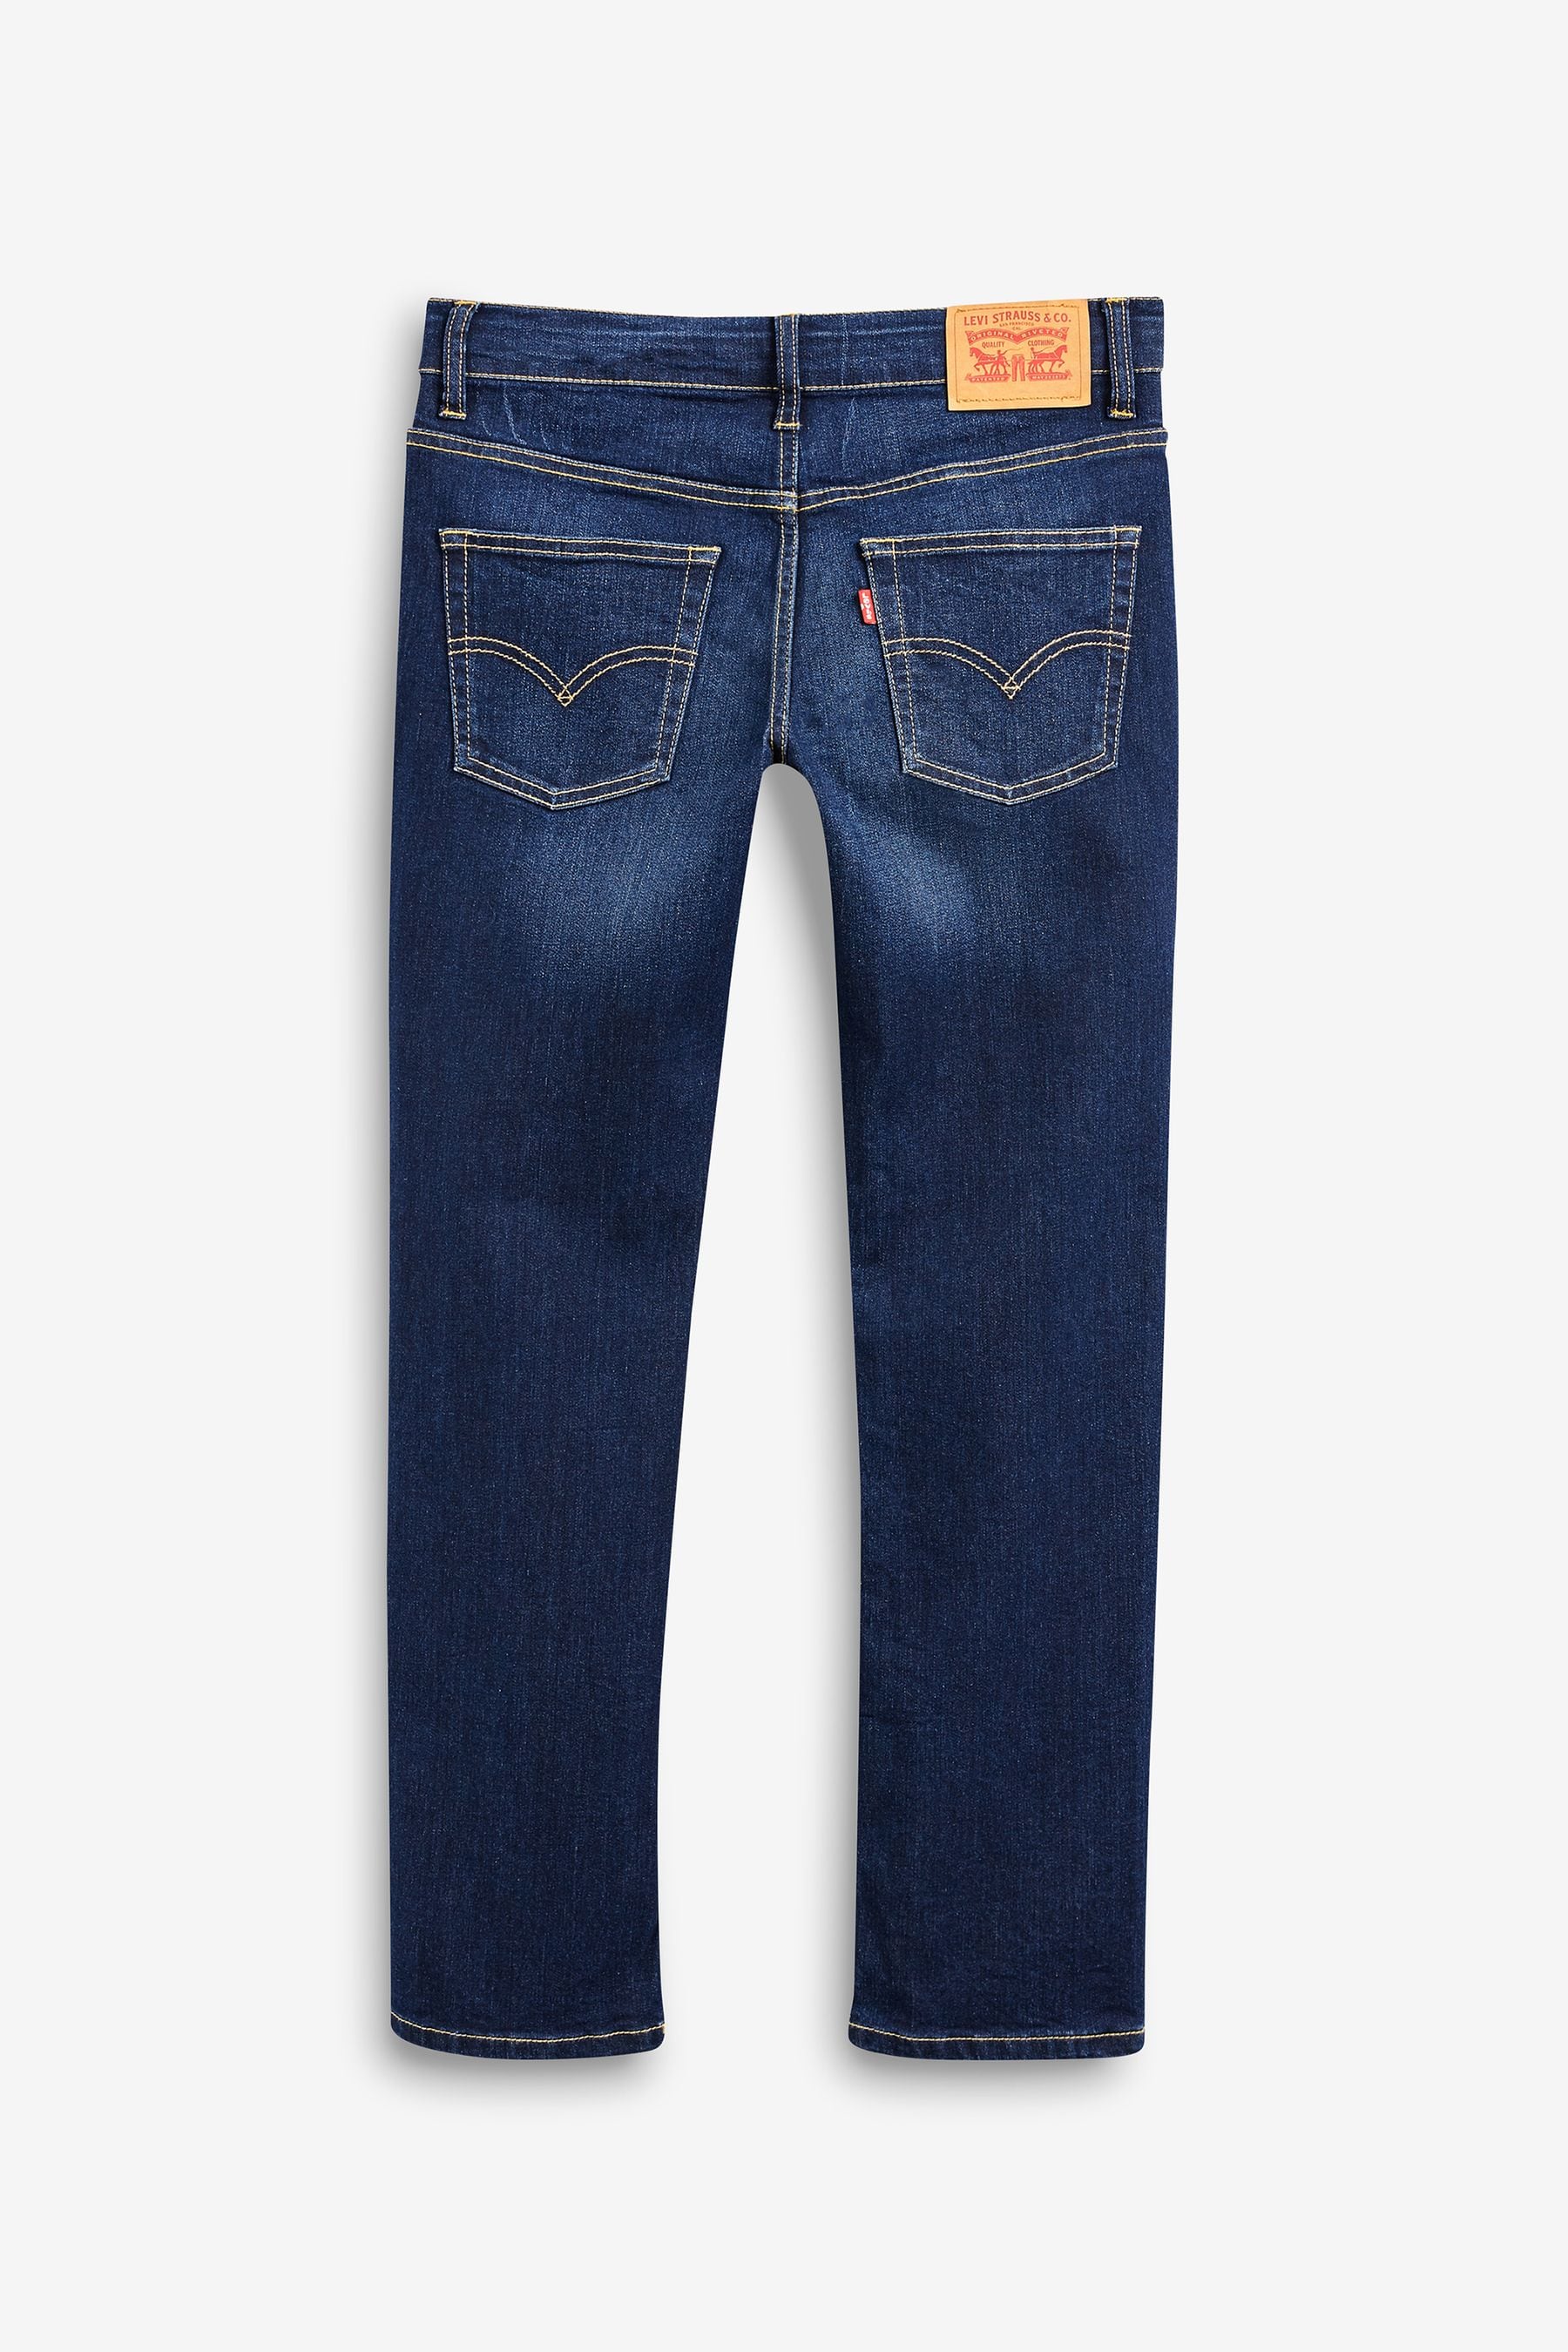 Buy Levi's® Rushmore Kids 511™ Slim Fit Jeans from the Next UK online shop